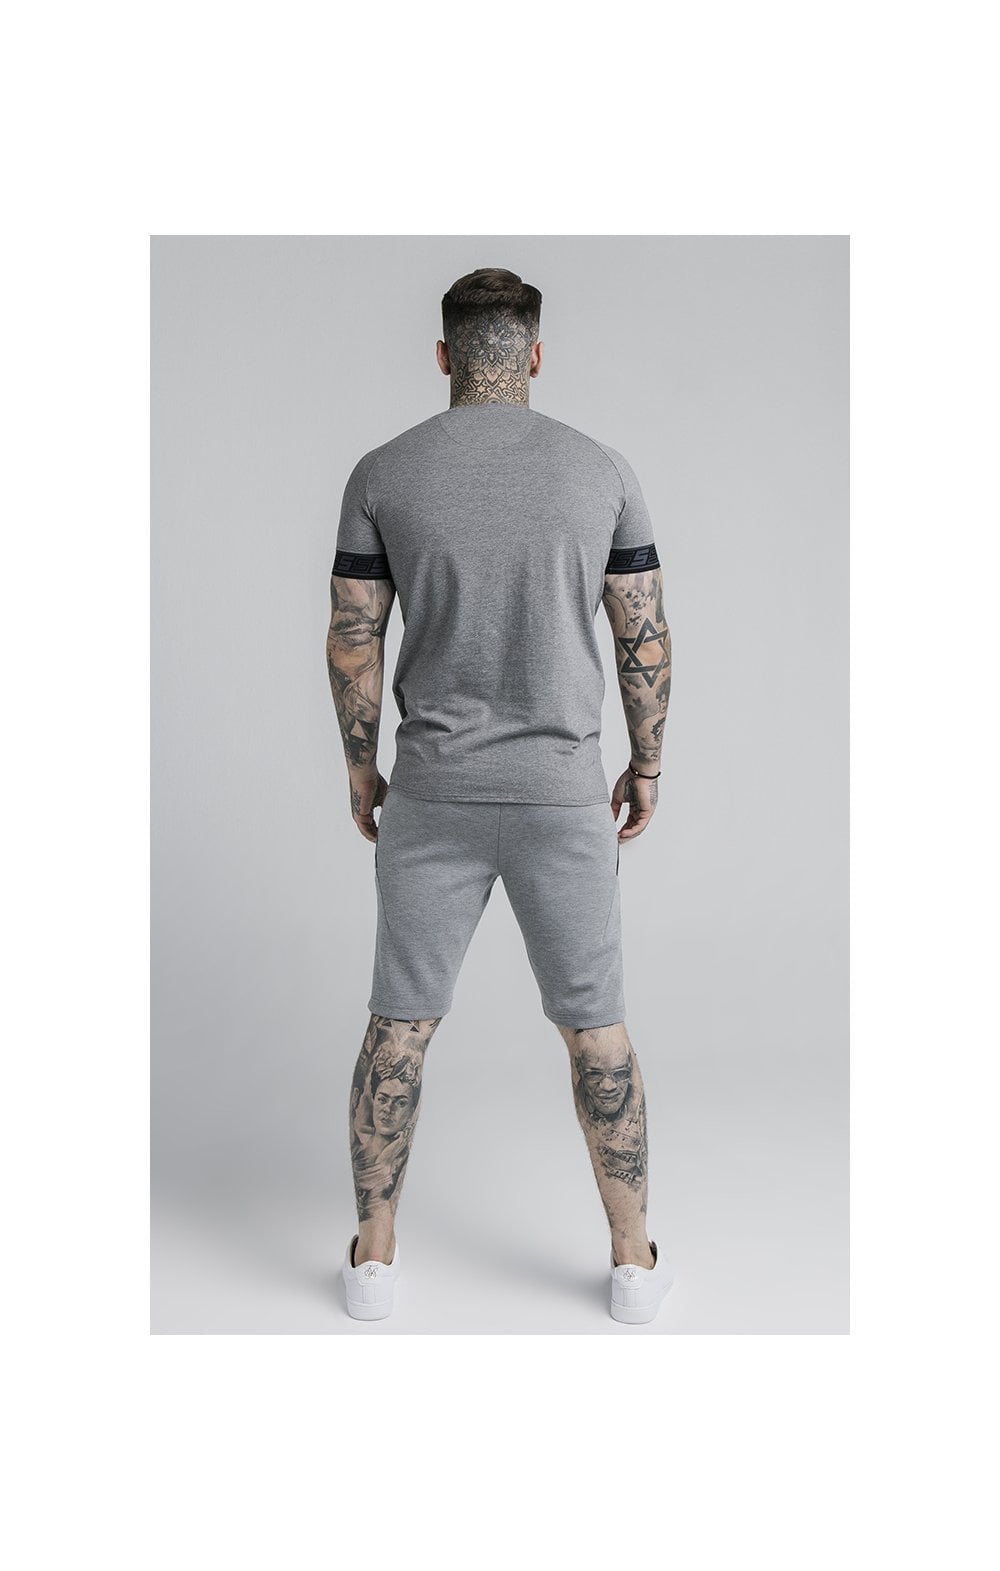 Load image into Gallery viewer, SikSilk S/S Exhibit Tech Tee - Grey Marl (3)